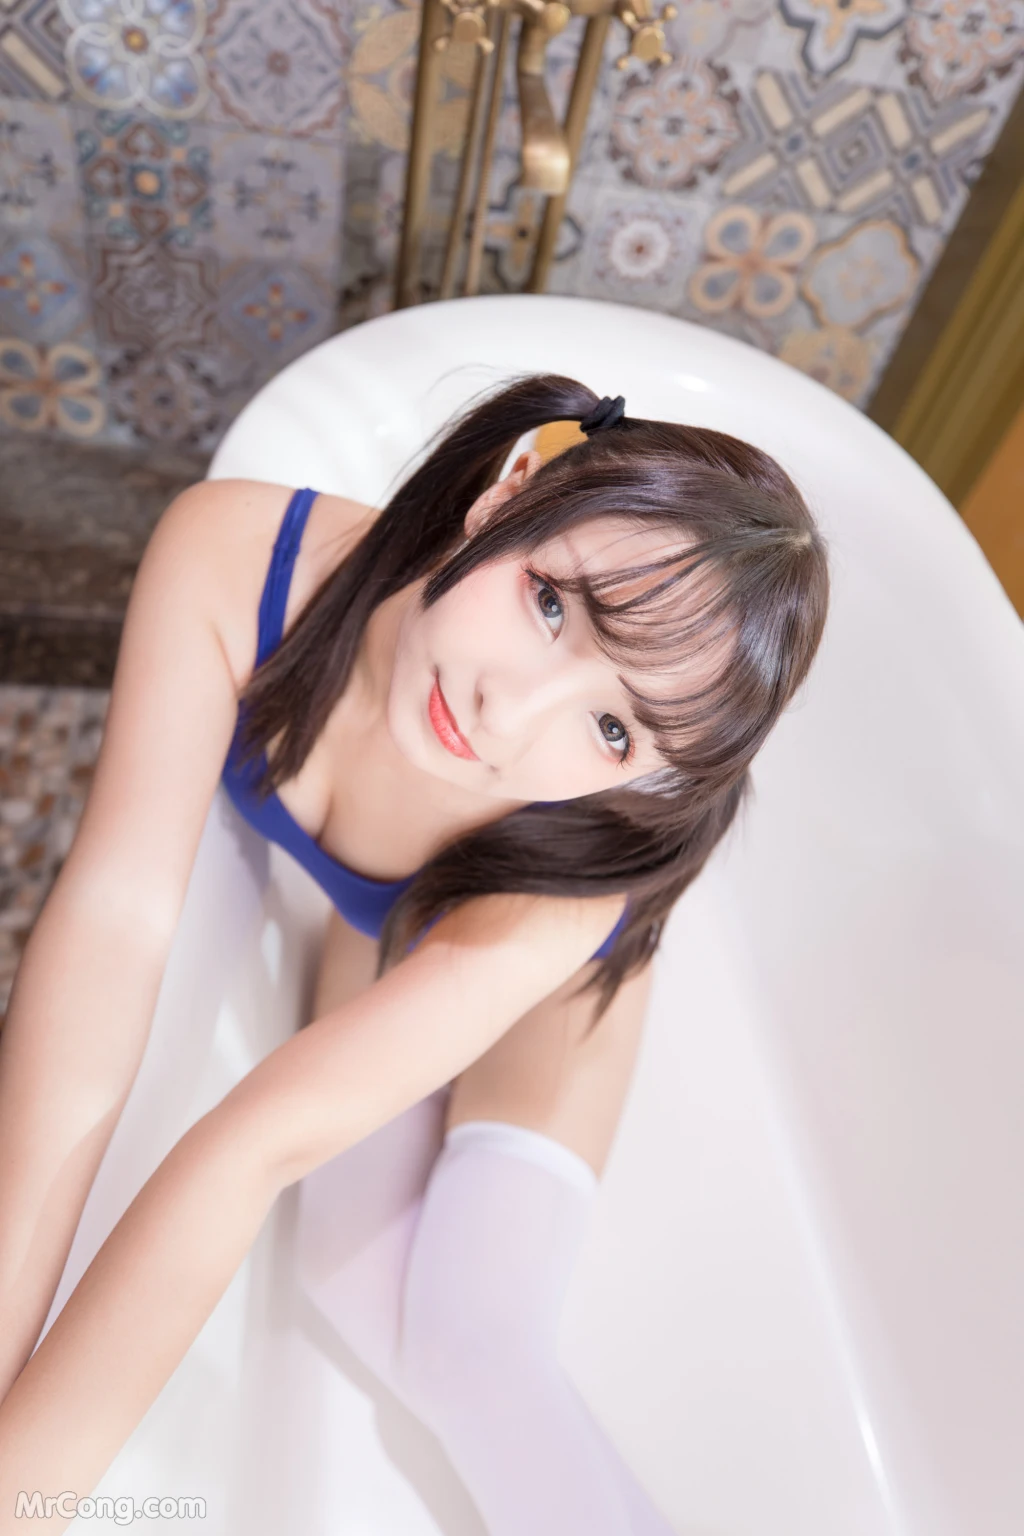 Coser@神楽坂真冬 Vol.050: 电子相册-死库水《水の形》 (150 photos) photo 1-14